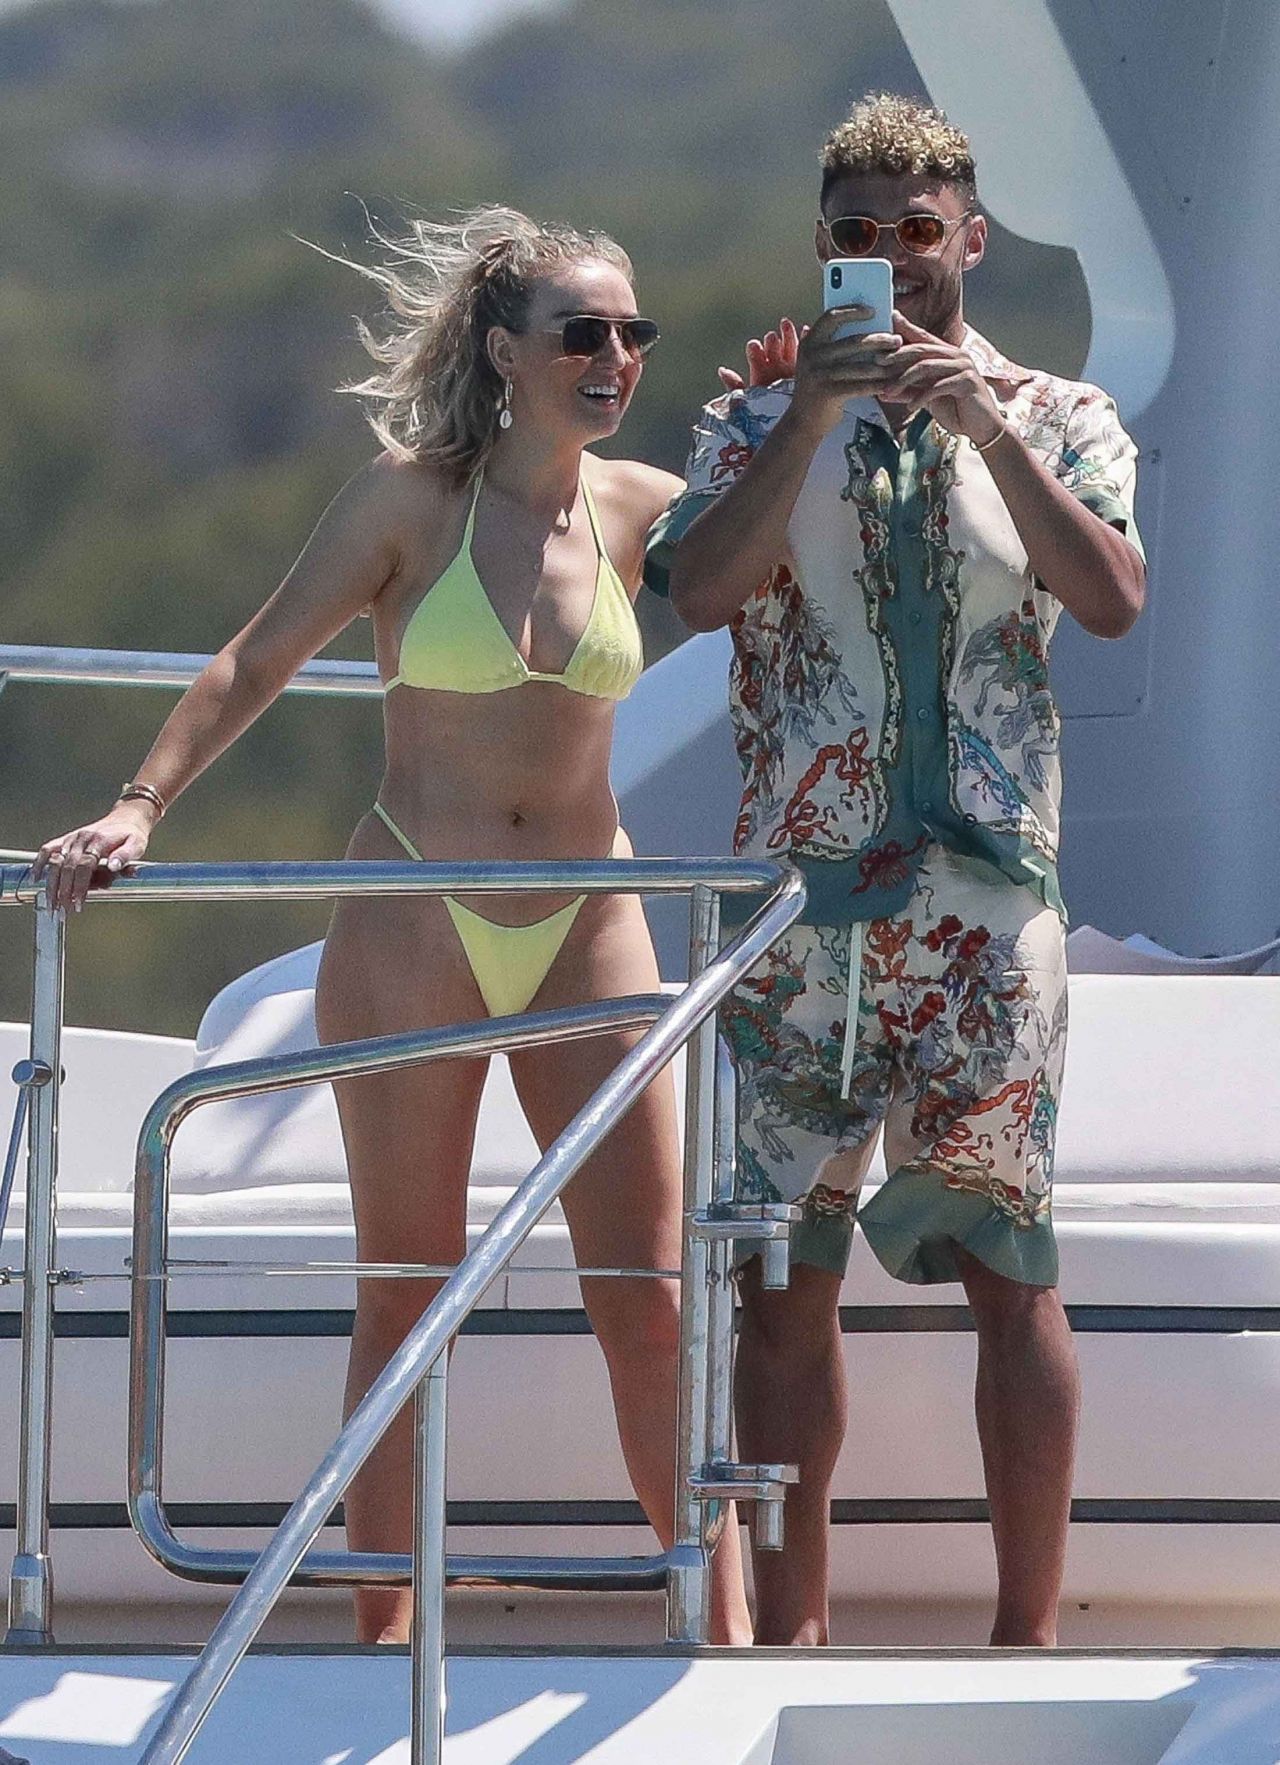 perrie-edwards-and-alex-oxlade-chamberlain-holiday-in-ibiza-06-05-2019-3.jpg